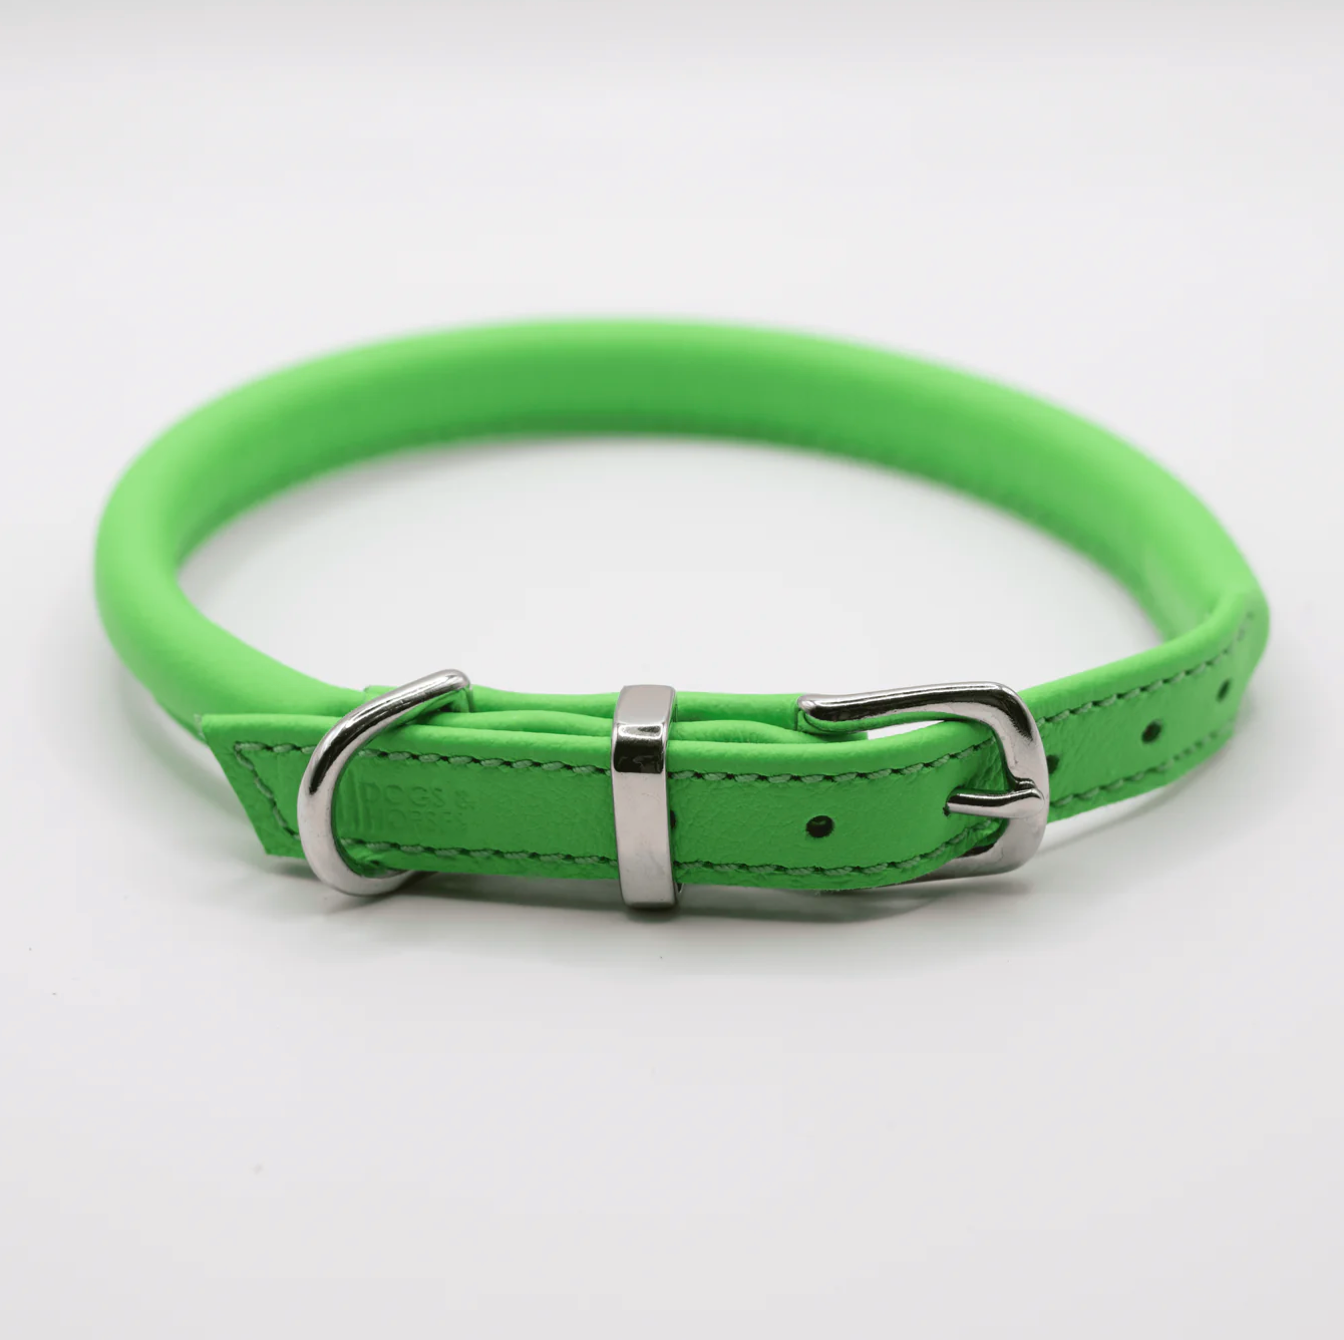 Rolled Soft Leather Dog Collar Bright Green